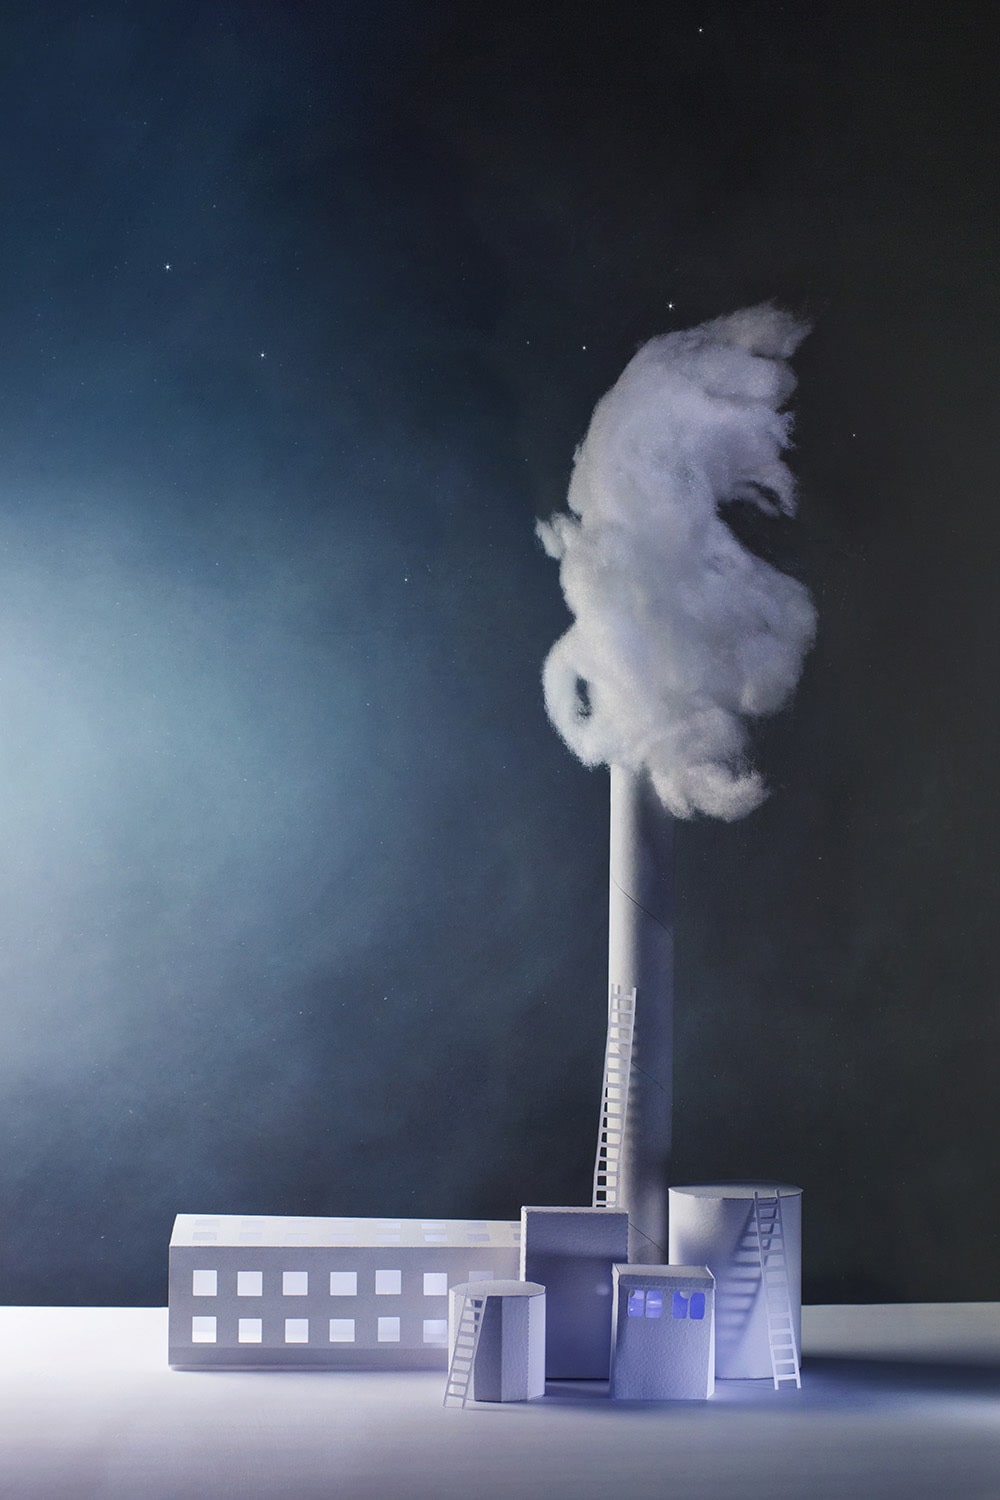 A paper factory at night with plumes of smoke rising from its single chimney